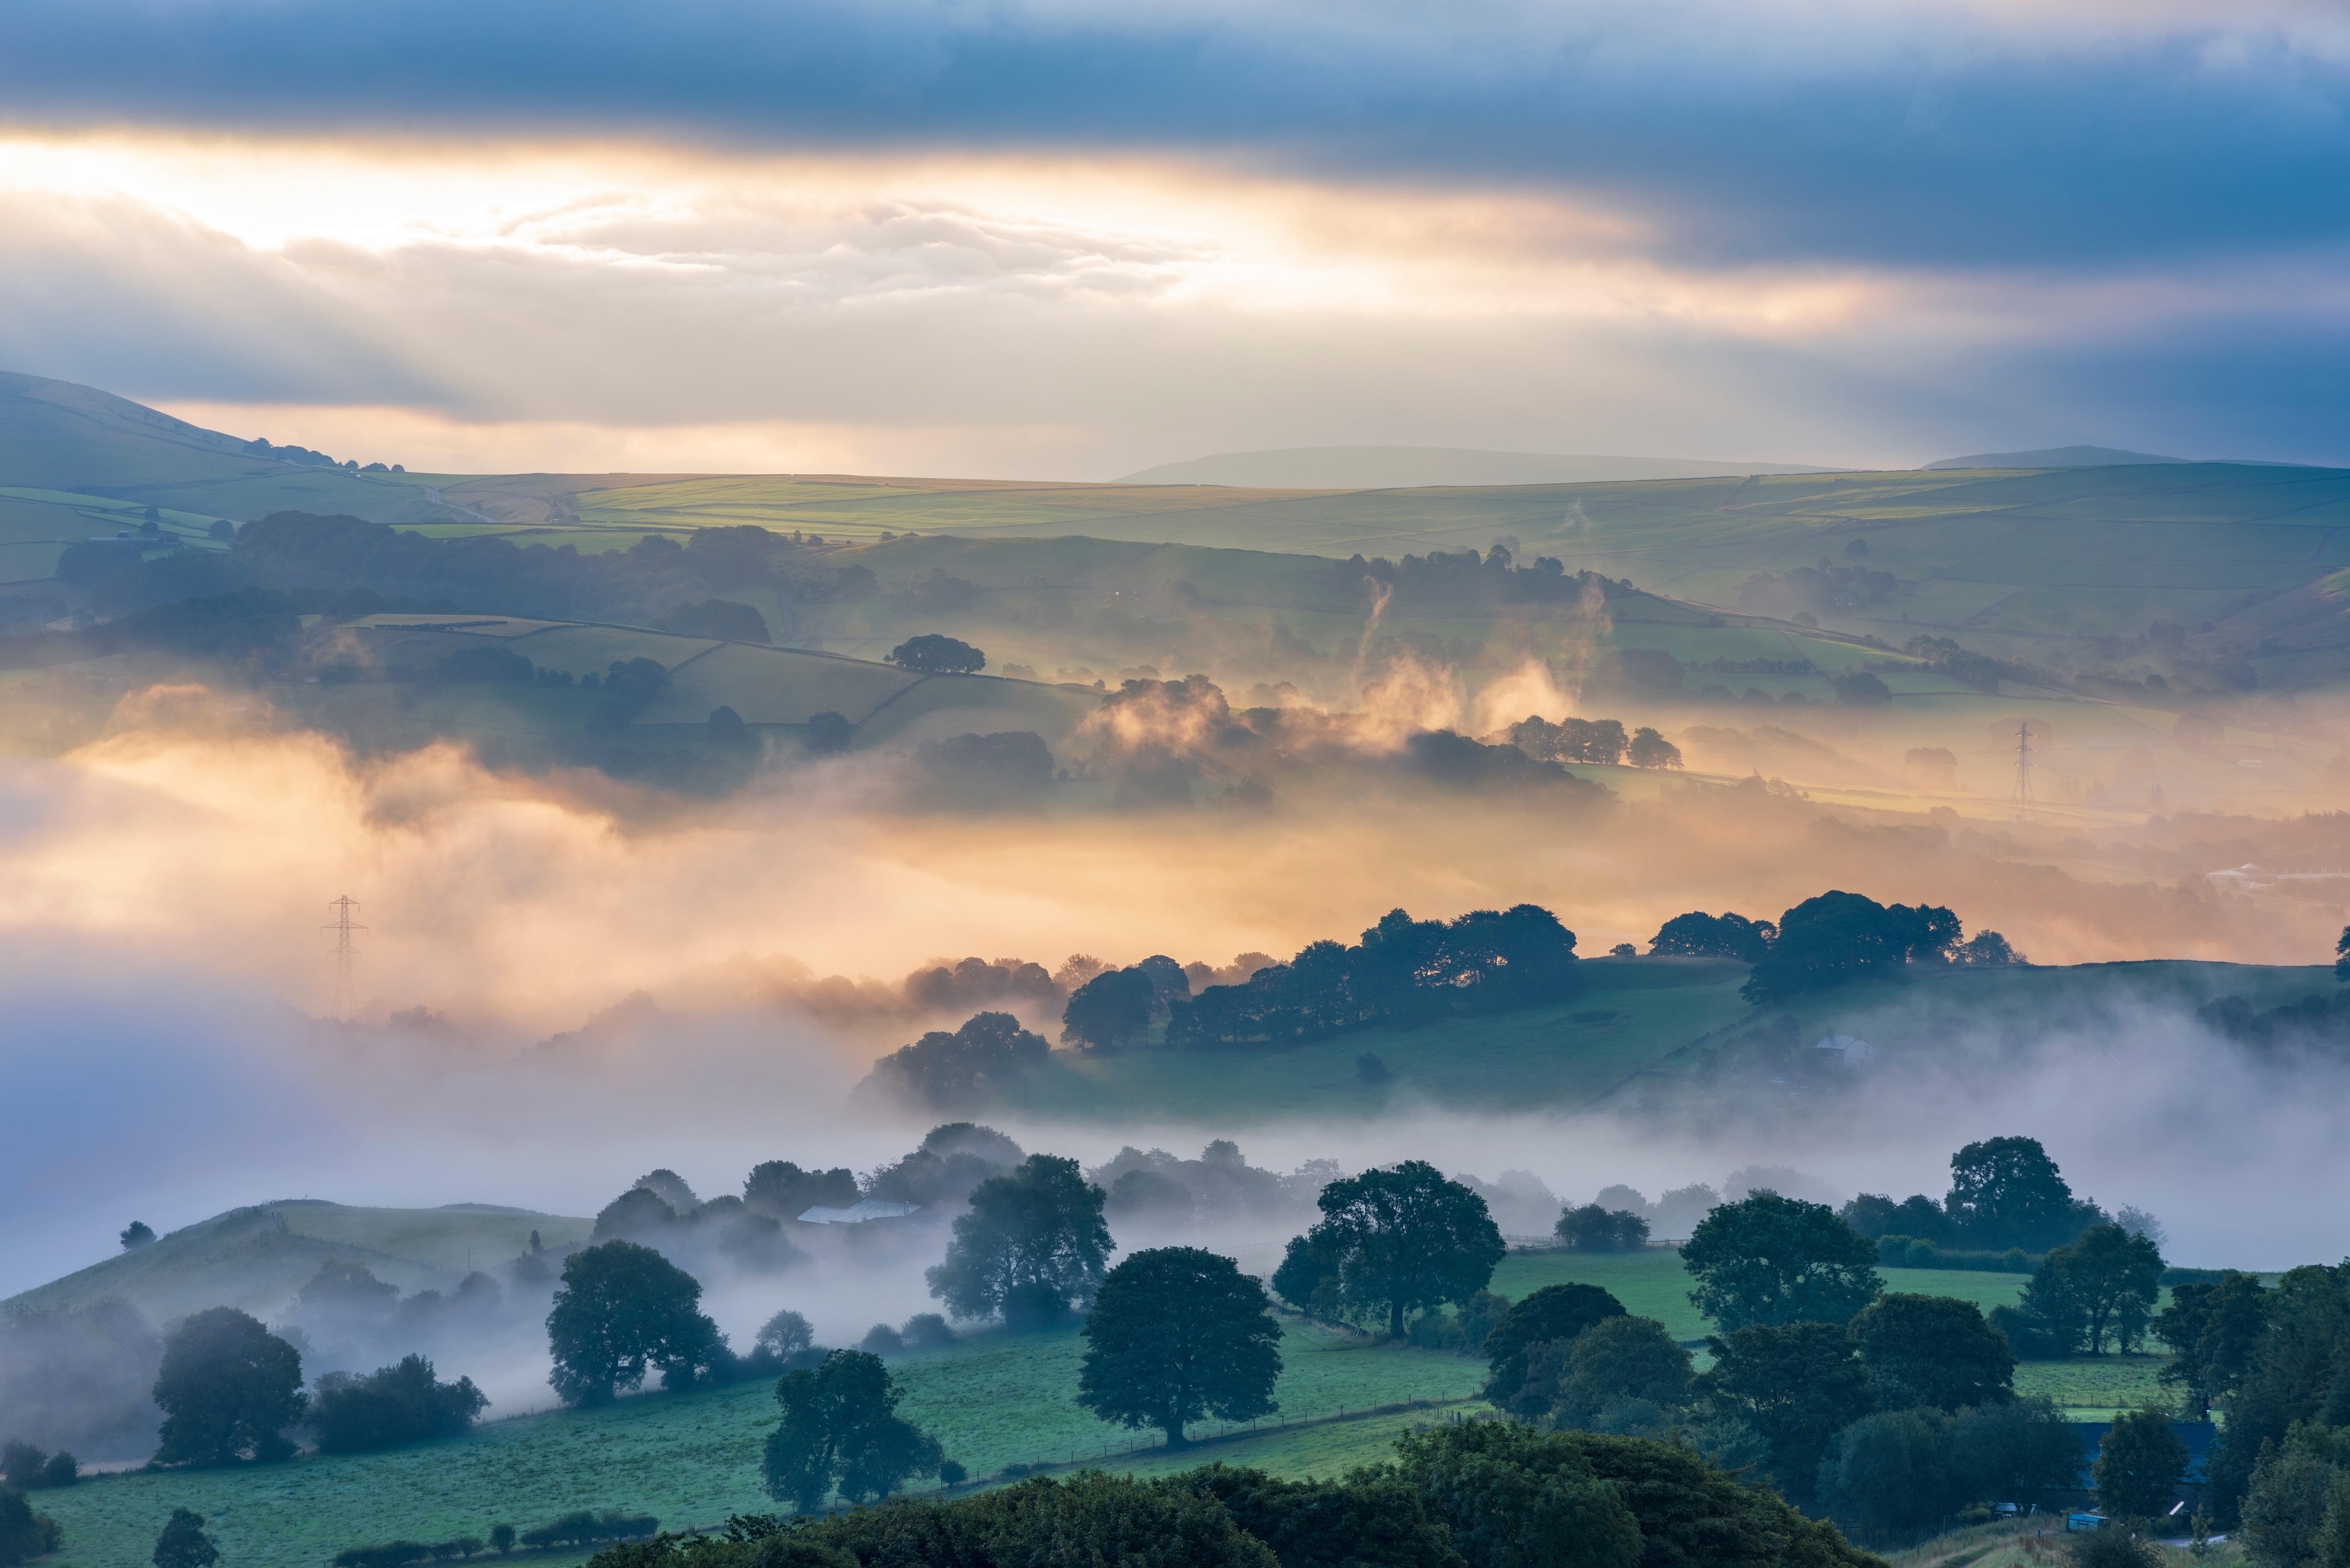 A stunning sunrise on a misty and foggy morning around the valleys